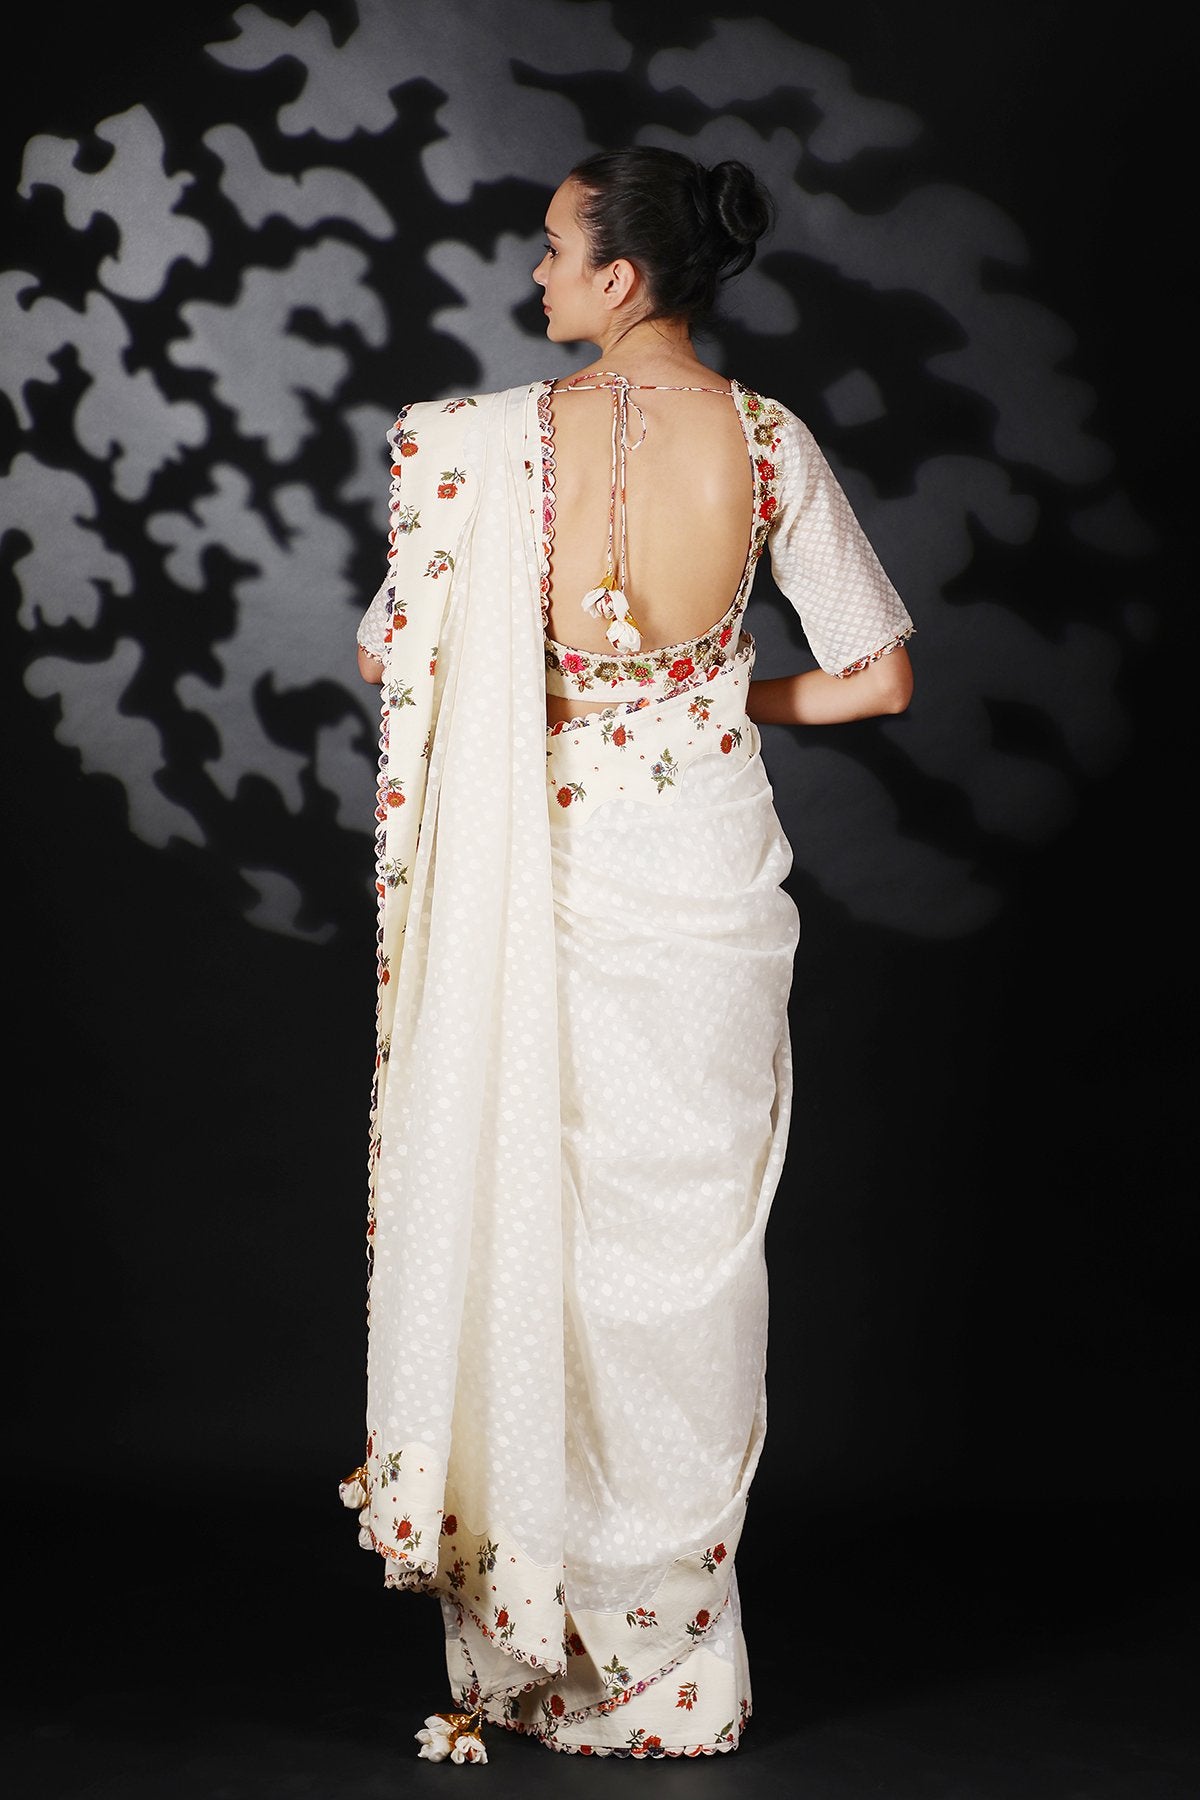 Lilly Off White Handwoven Cotton Jamdani Saree Paired with a hi-neck Blouse with Floral Hand Embroidered Neckline.